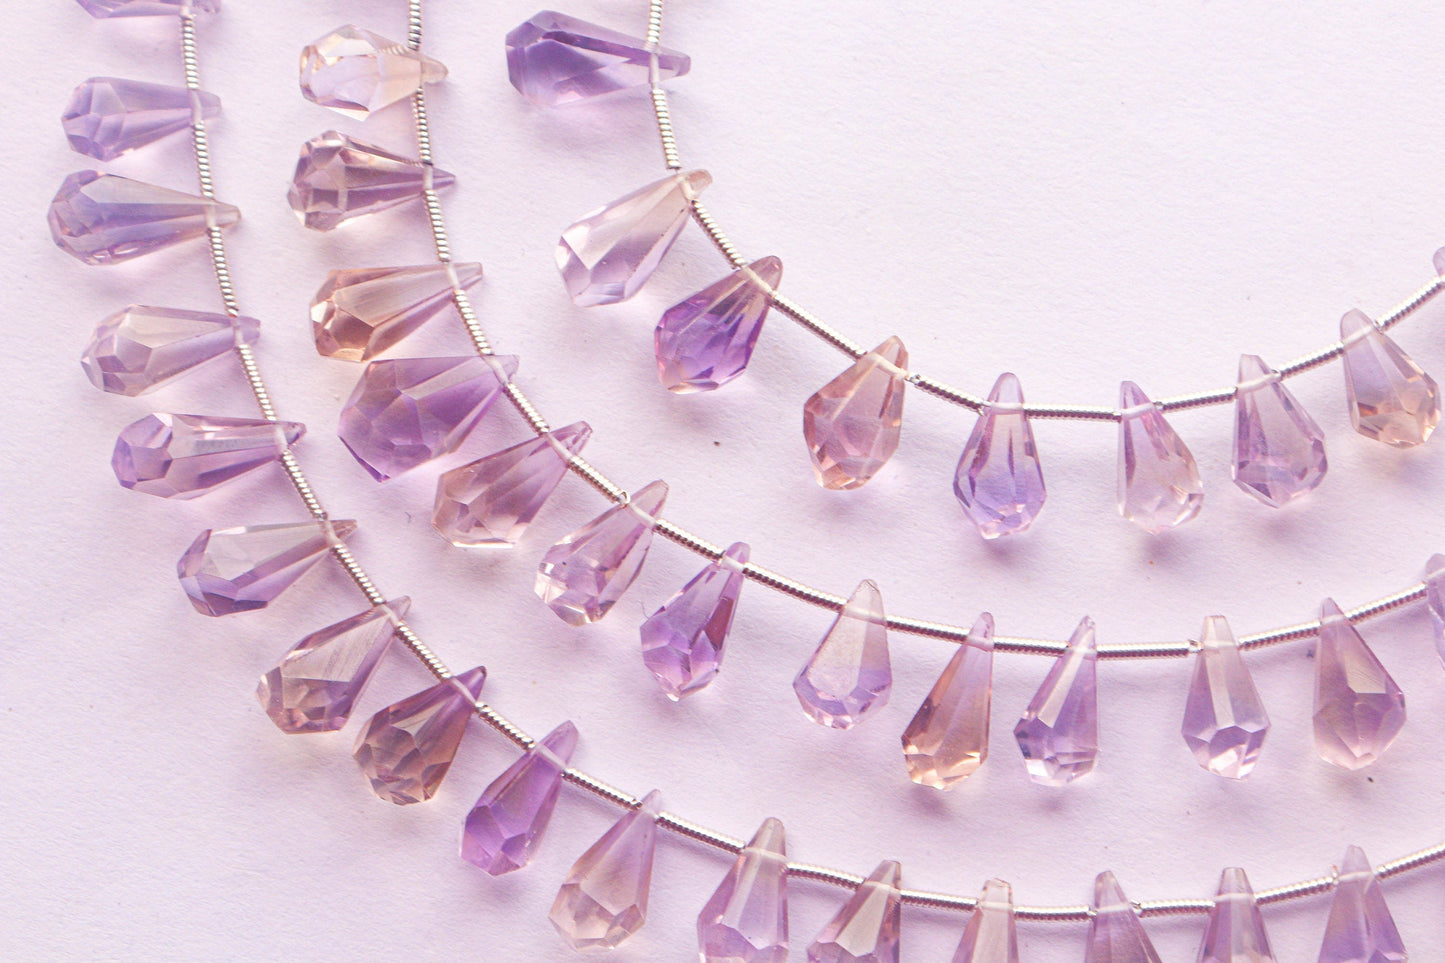 Ametrine Gemstone Tumble Shape Faceted Drops | 5x11mm to 8x13mm | 25 Pieces | Natural Gemstone for Jewelry | Beads for jewelry | Beadsforyourjewelry